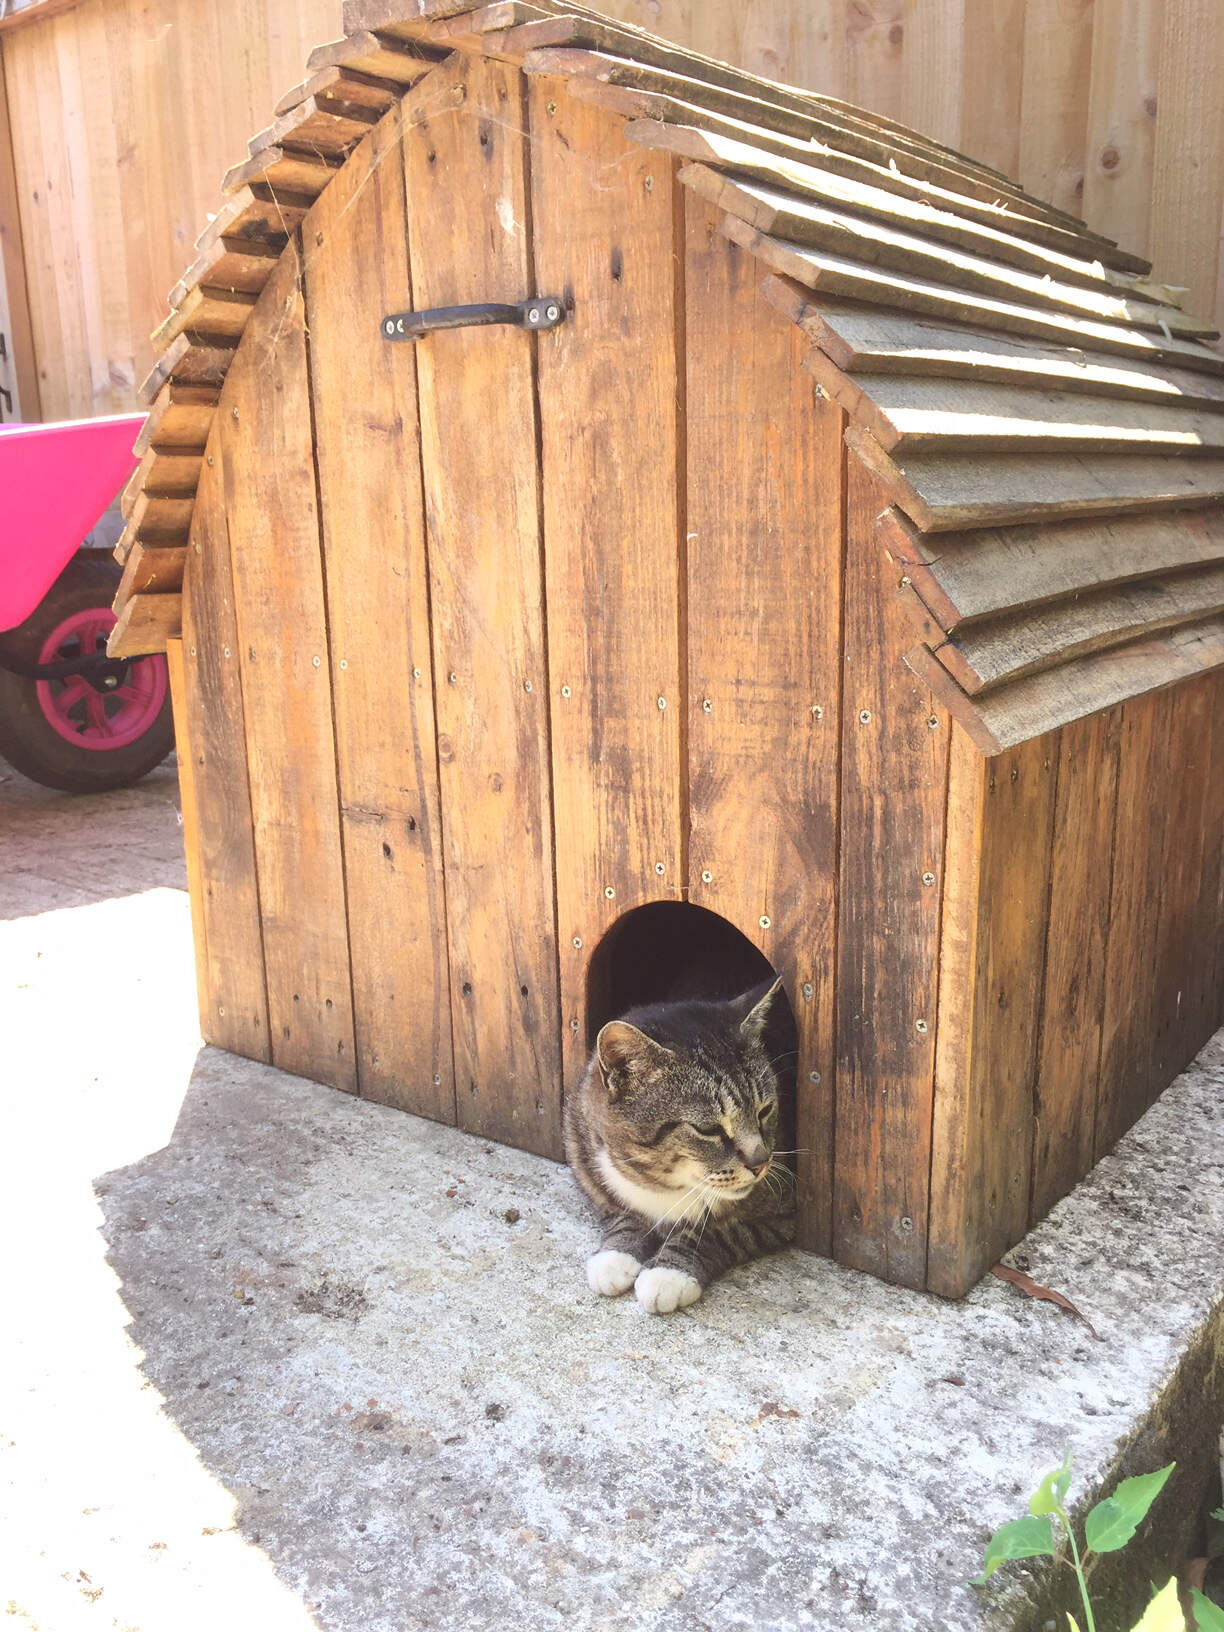 Construction of a floating duck house... well, the cat likes it!